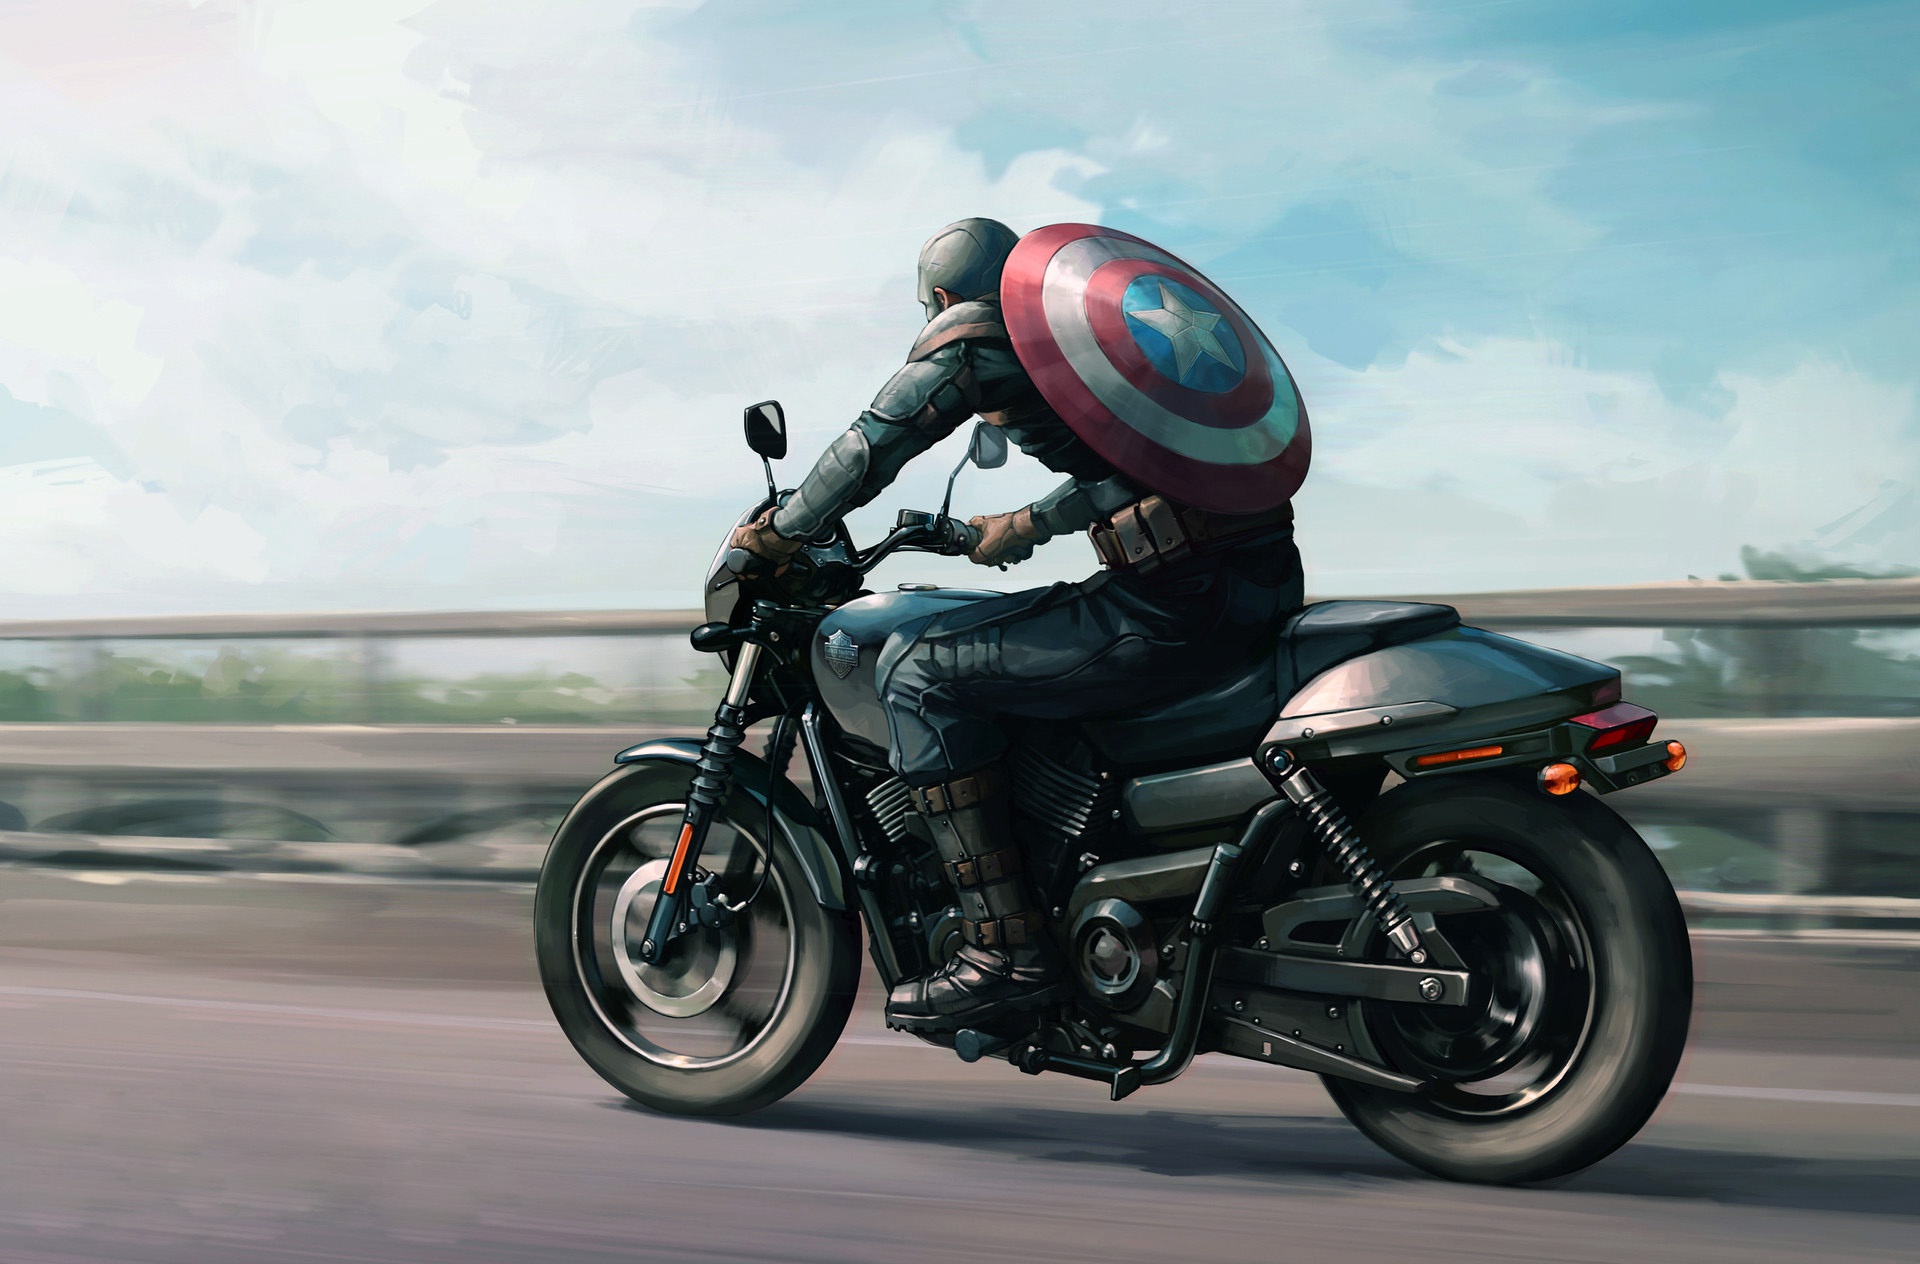 Captain America Captain America The Winter Soldier Harley Davidson Marvel Comics Motorcycle 1920x1264